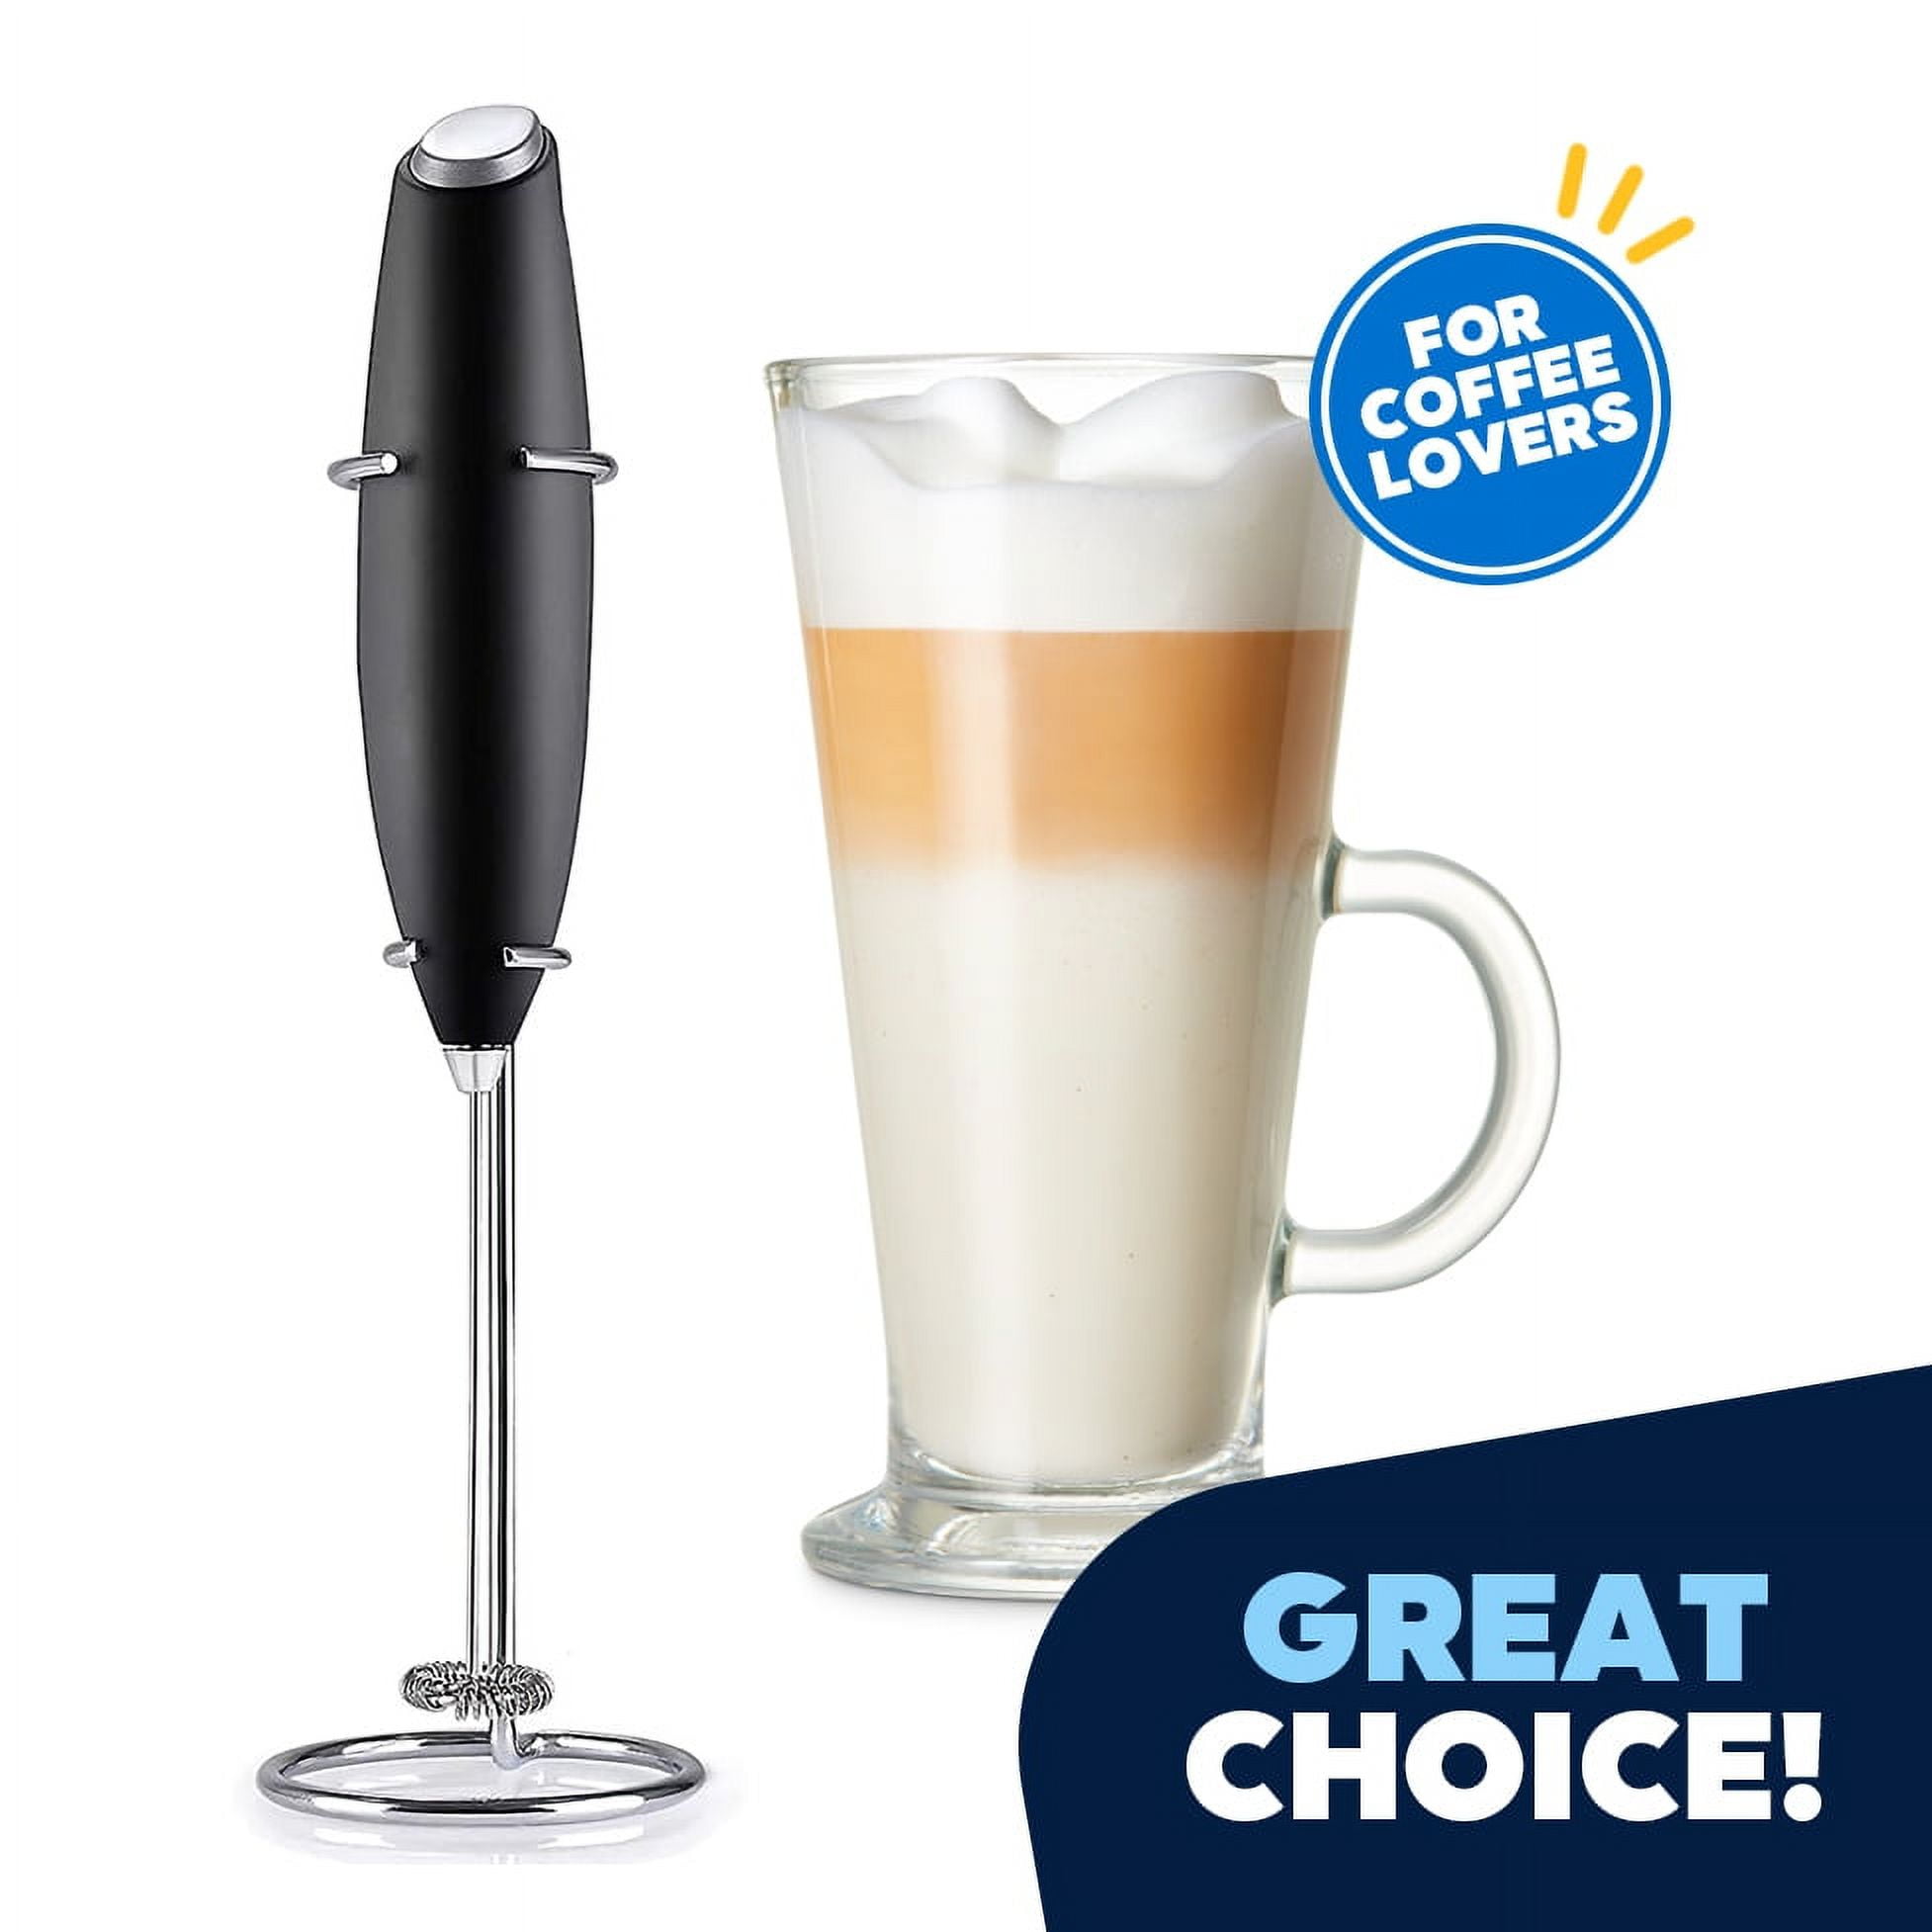 Graphyte Handheld Milk Frother for Lattes, Coffee & More